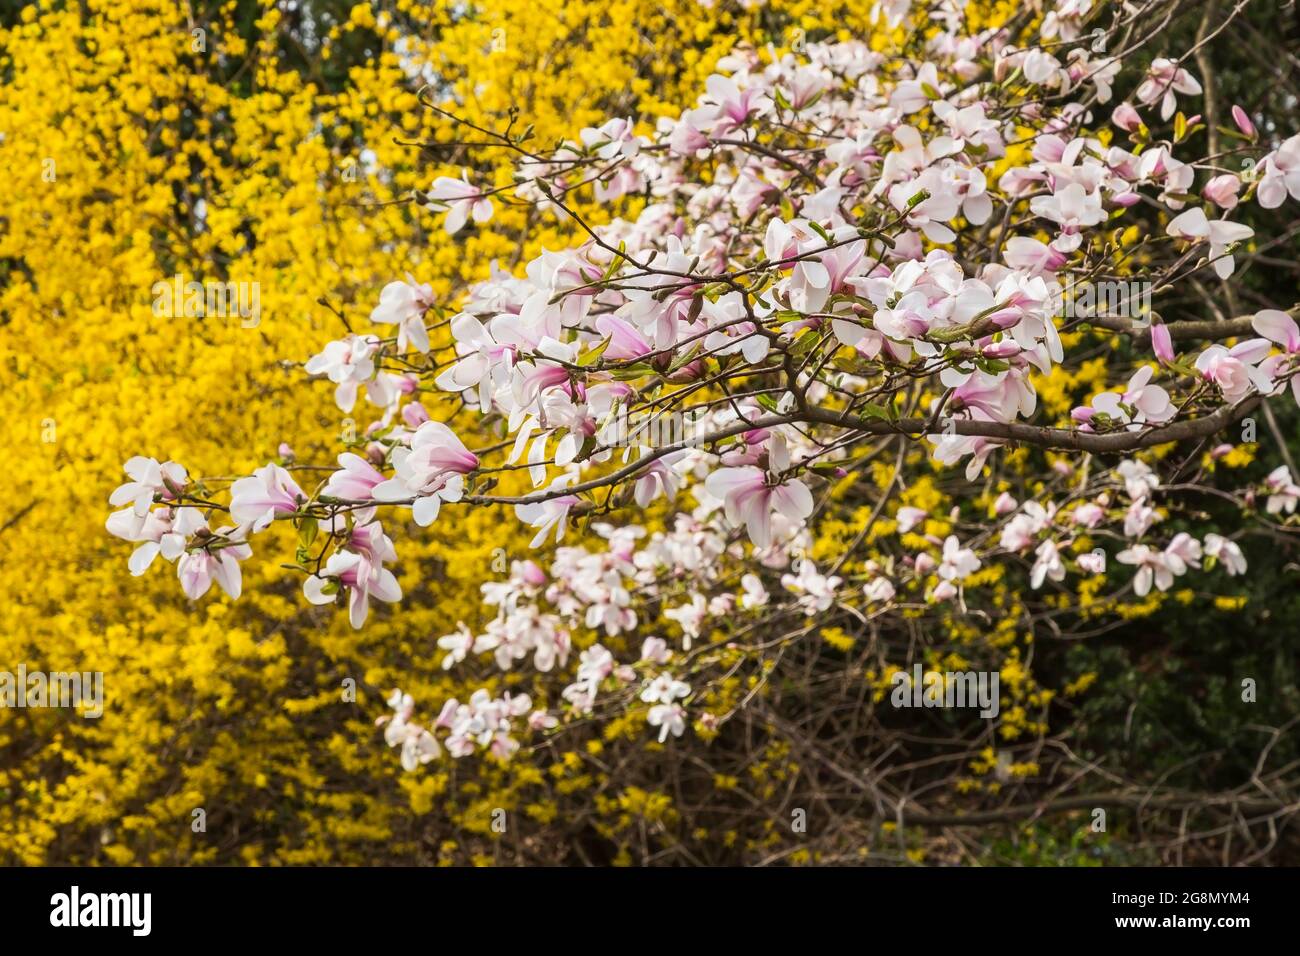 White and mauve flowering Magnolia Kobus tree against a Forsythia 'Northern Gold' shrub in spring Stock Photo